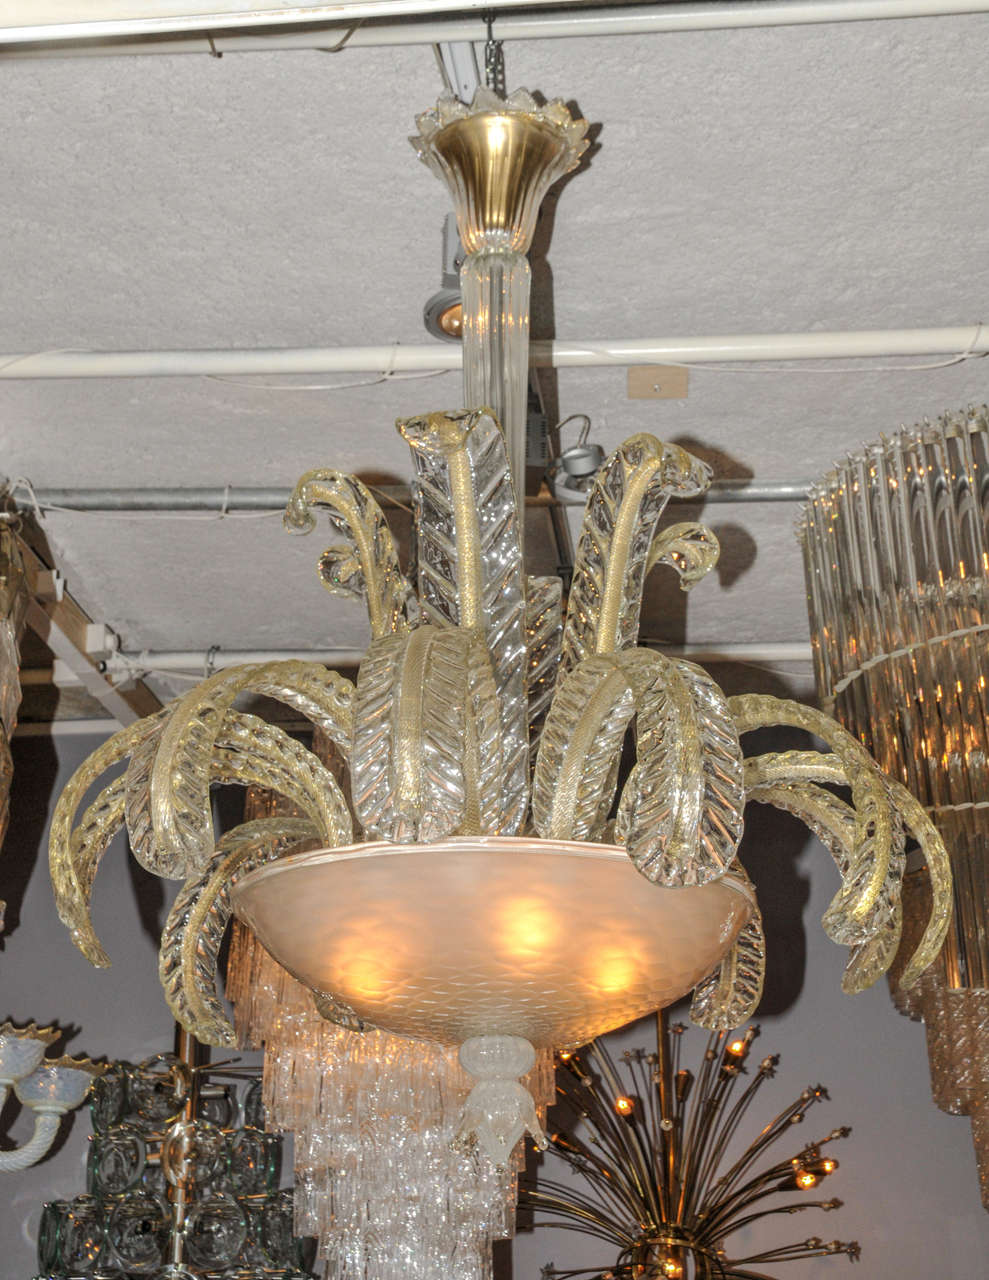 1950-1960's Fountain Murano chandelier in Murano glass with gold glittered finish attributed to Barovier. Wired for European use. Good condition. Normal wear consistent with age and use.